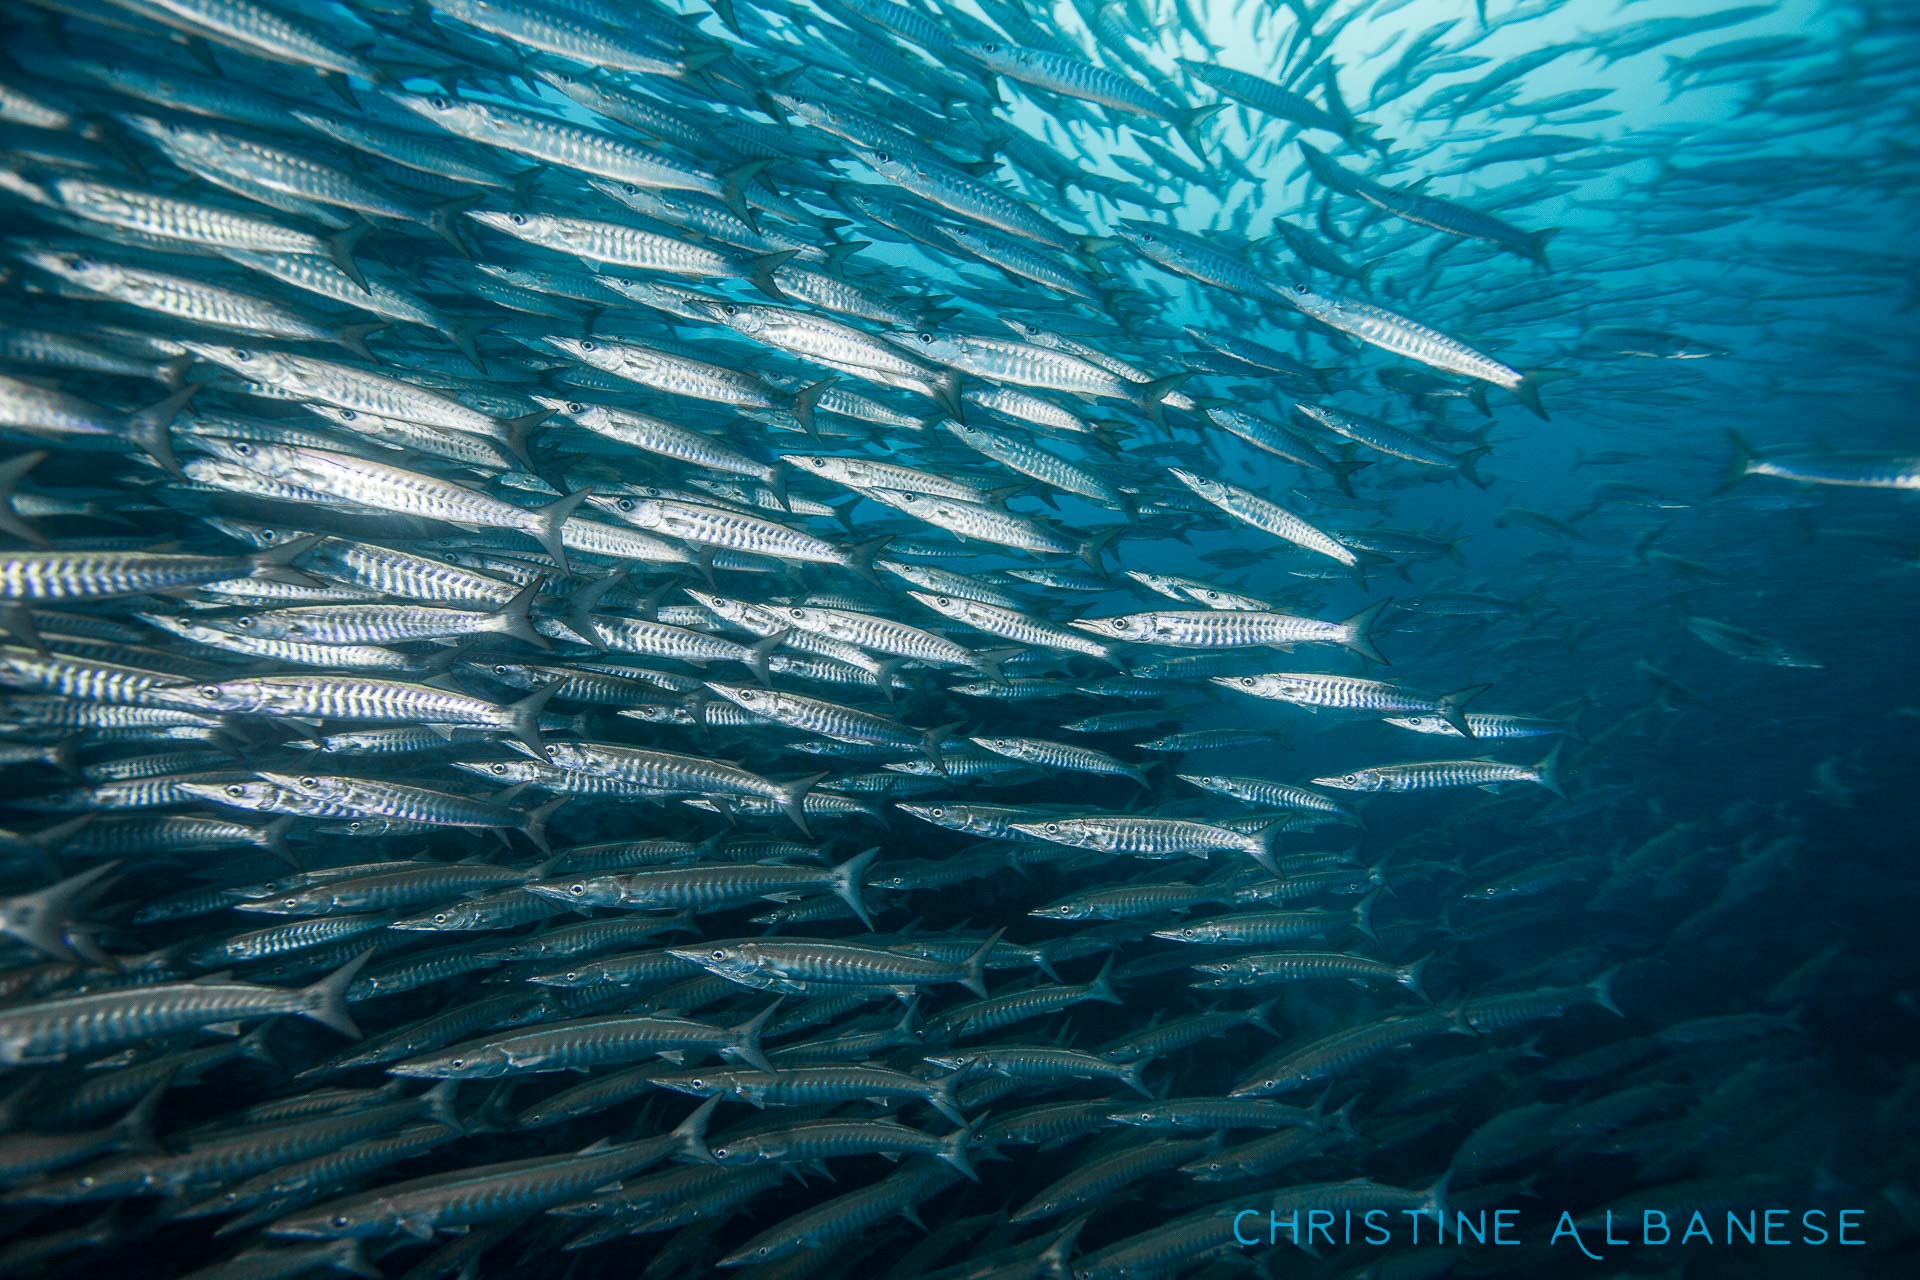 I love being in the middle of a school of Barracuda :)